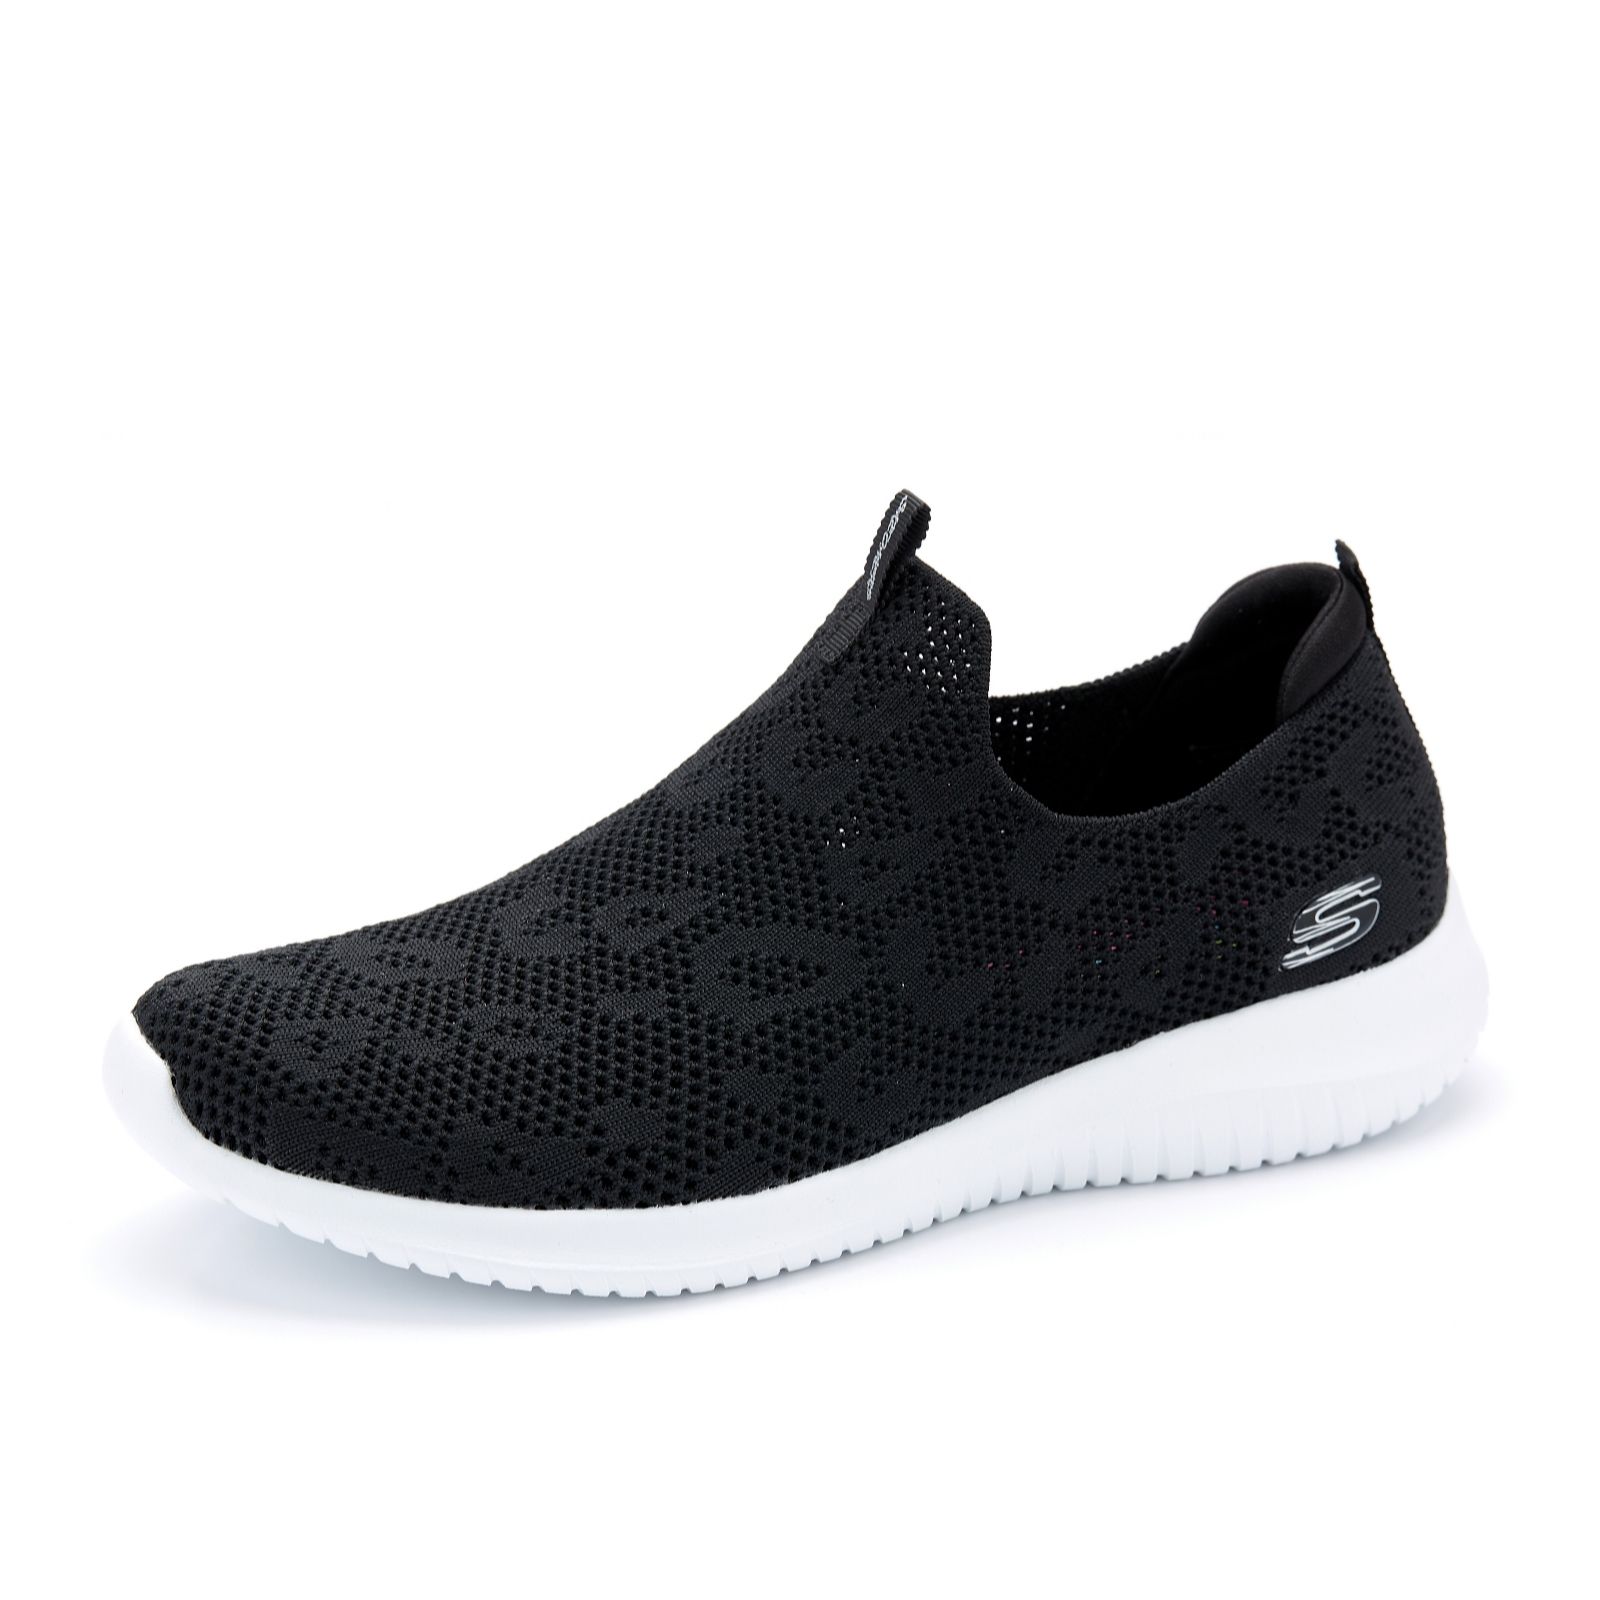 stretch fit by skechers